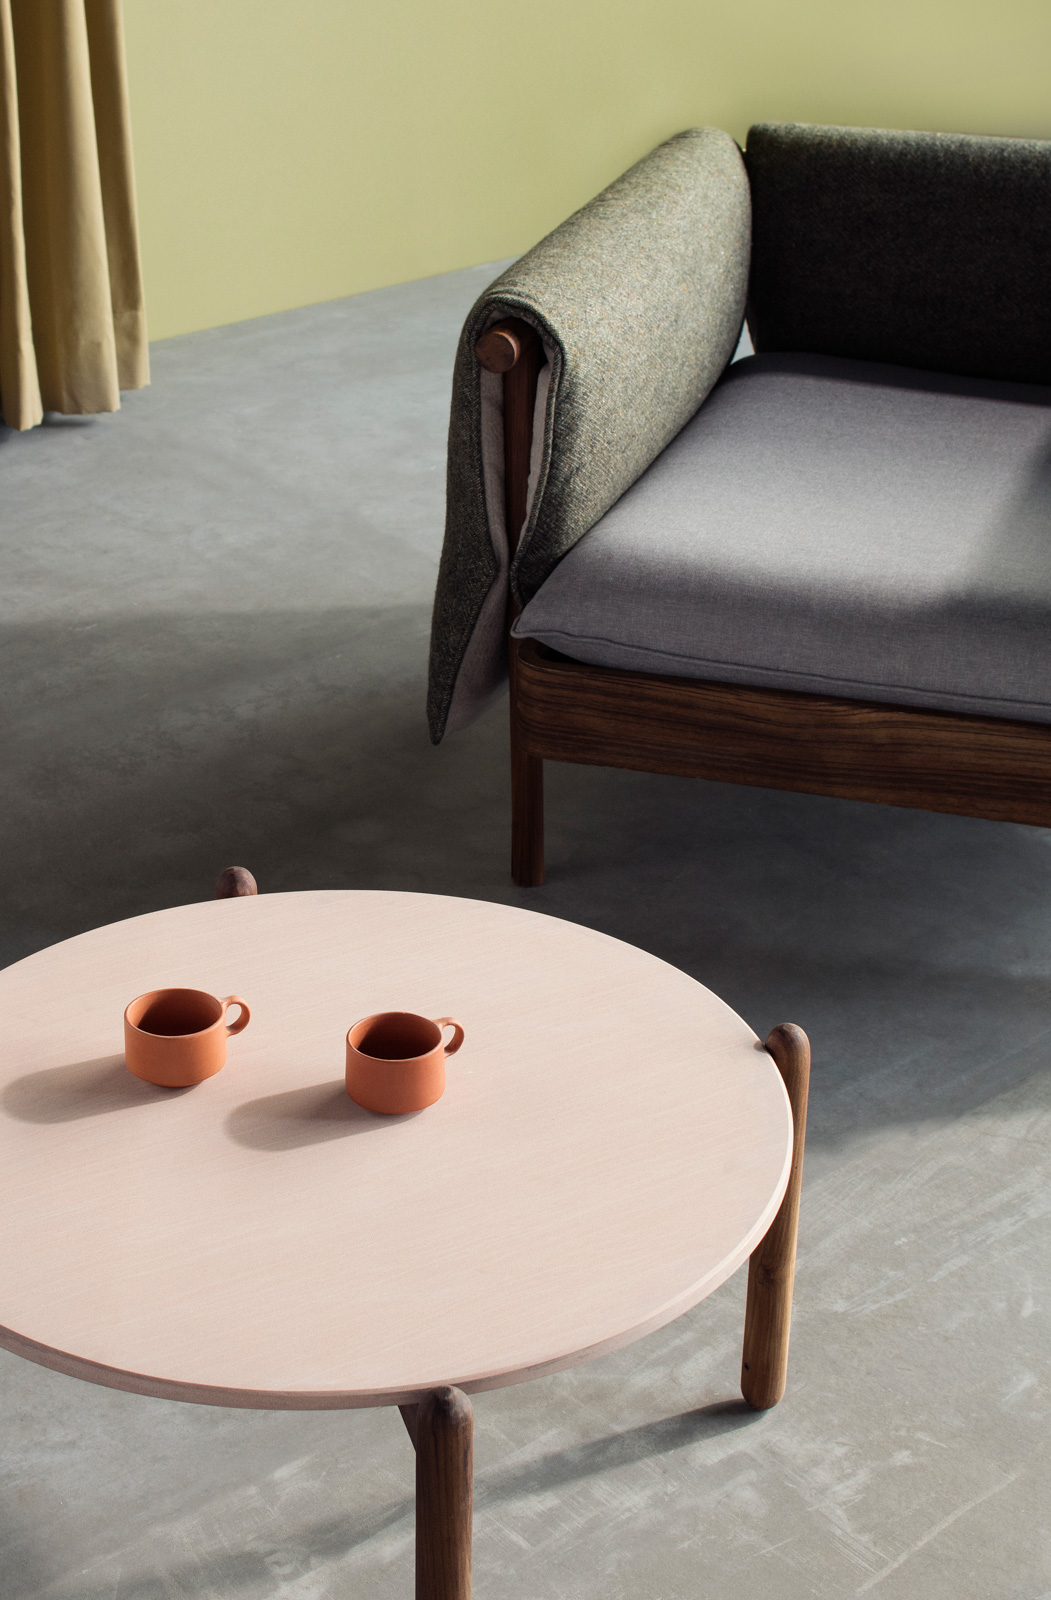 The ‘Pila’ coffee table designed by Quentin Voung from France has a pink Dholpur stone top fitted on an oiled teak wood cross frame. It is also available in charcoal black marble and speckled granite options. The ‘Paffe’ single-seater designed by Giorgio Gasco from Italy is available in a range of upholstery, from classic all-whites to pastel tones and deep neutrals. 